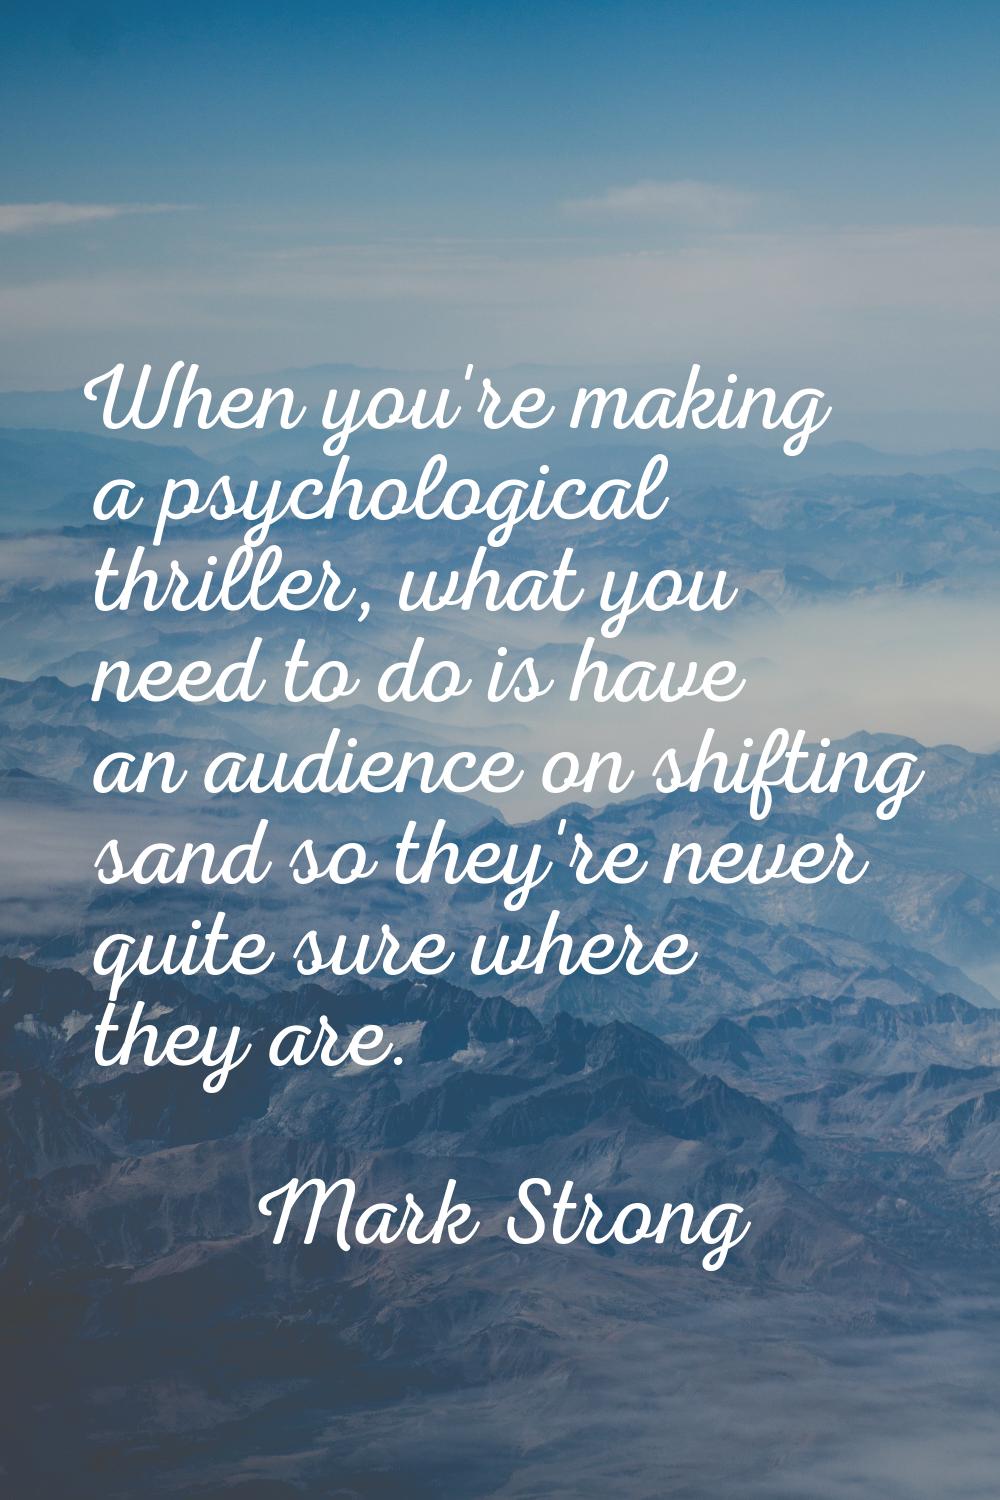 When you're making a psychological thriller, what you need to do is have an audience on shifting sa